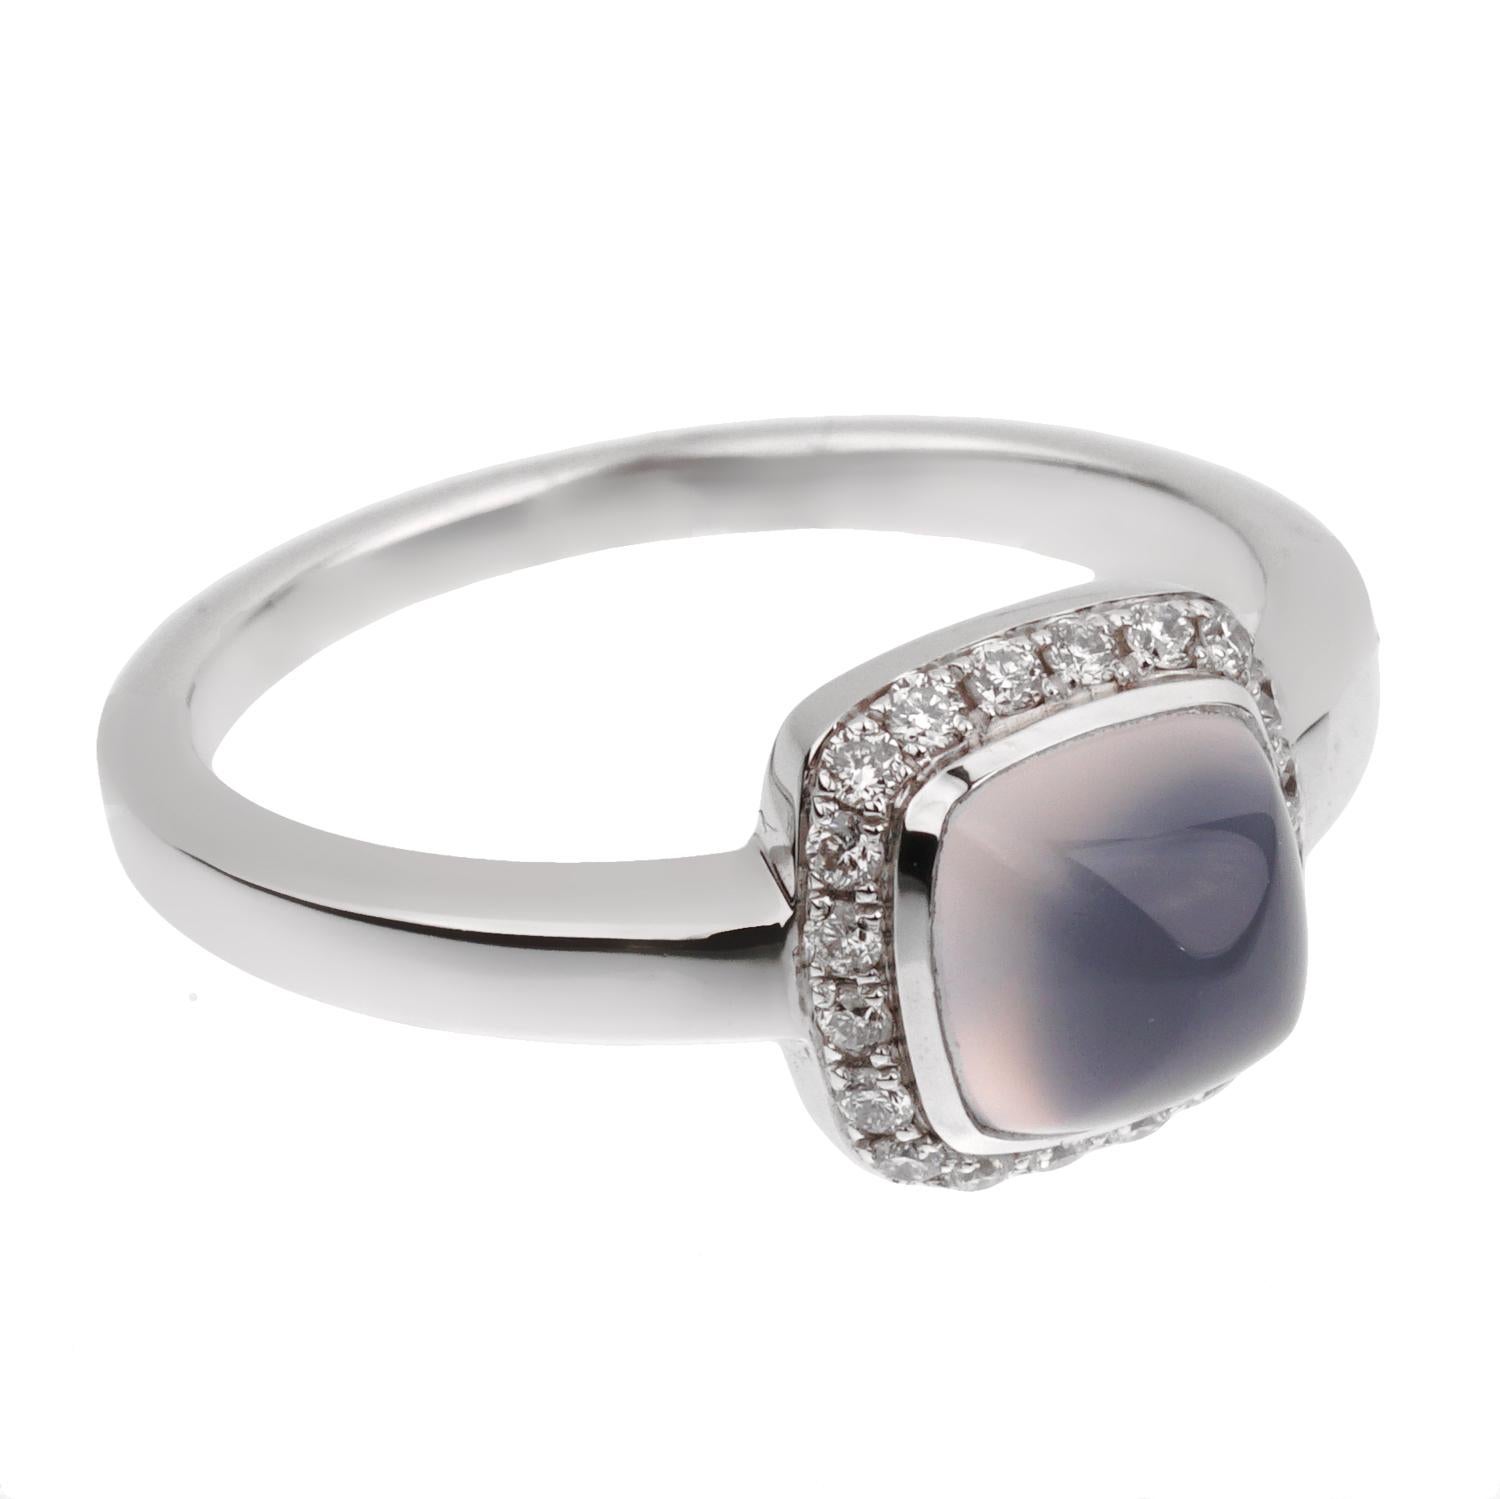 A fabulous brand new Fred of Paris ring showcasing a Chalcedony adorned with round brilliant cut diamonds in shimmering 18k white gold. The ring measures a size 5 and can be resized if needed.